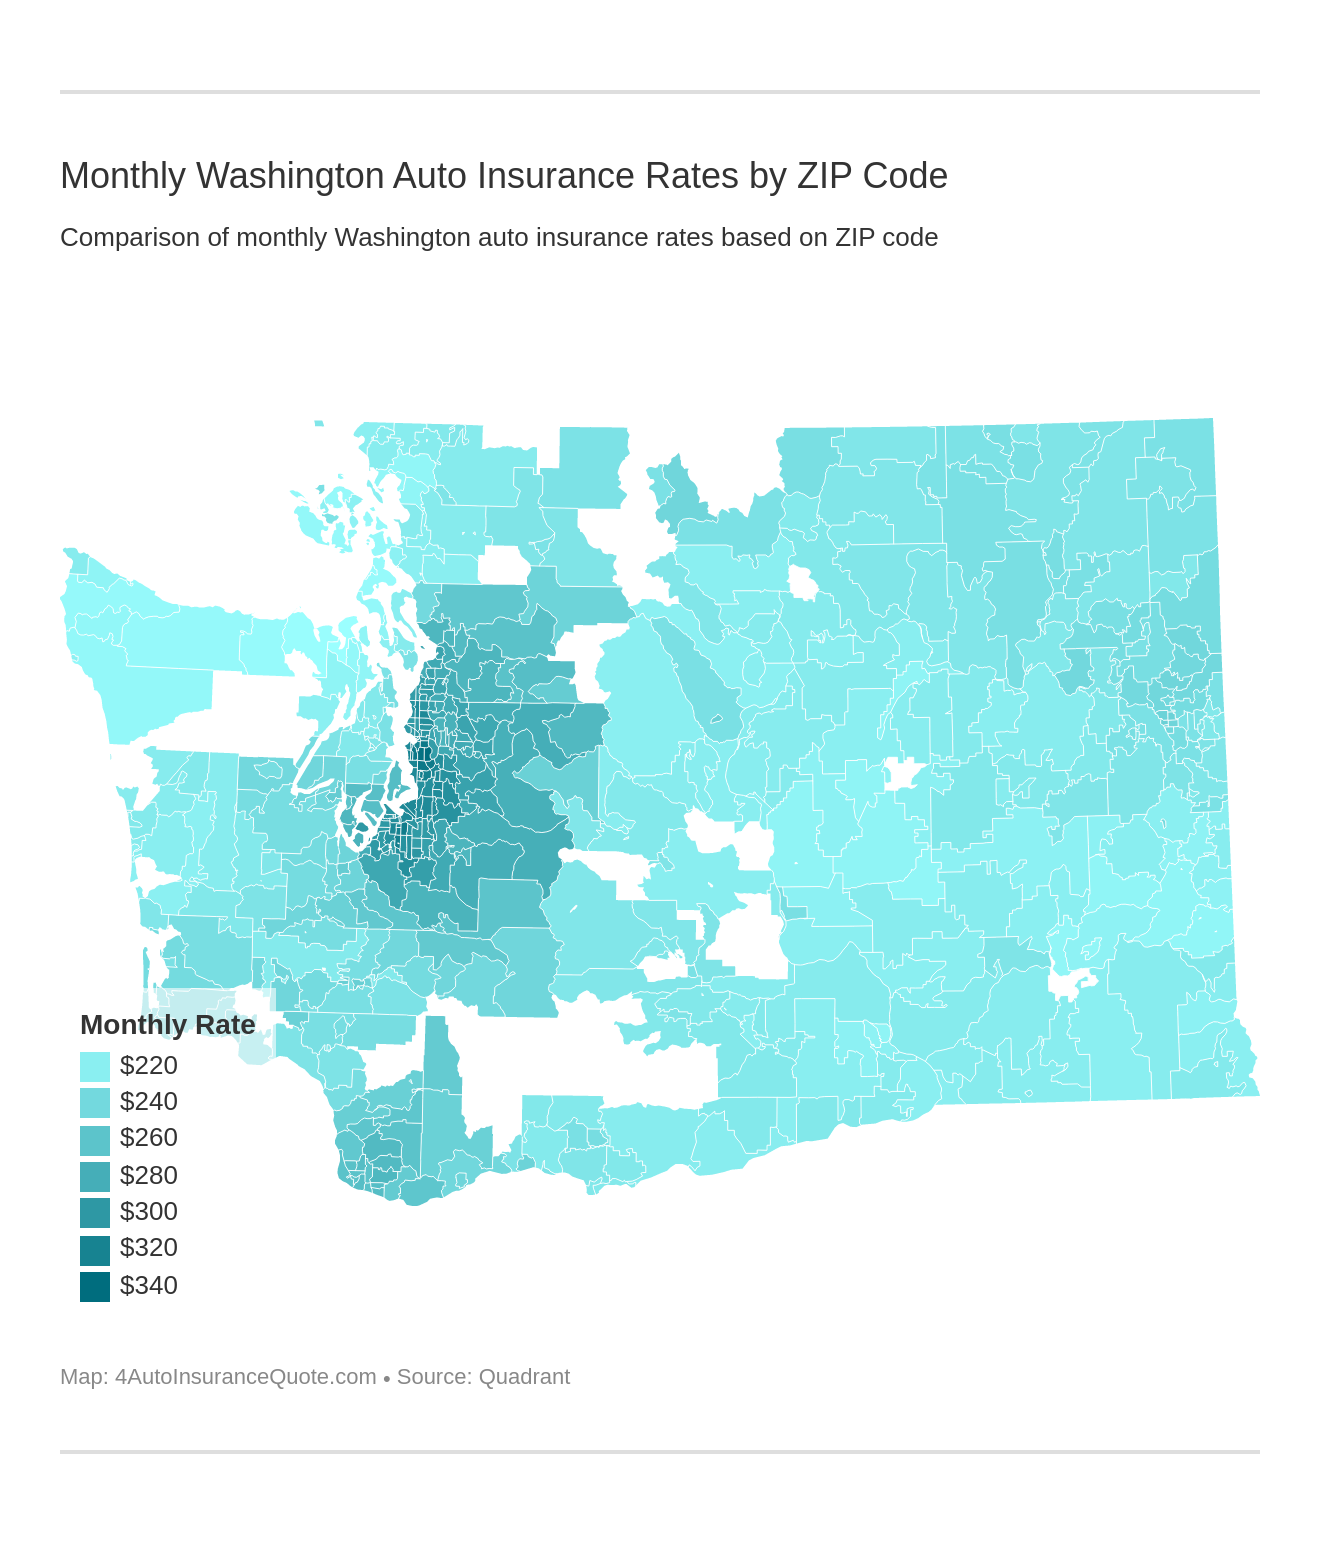 Monthly Washington Auto Insurance Rates by ZIP Code